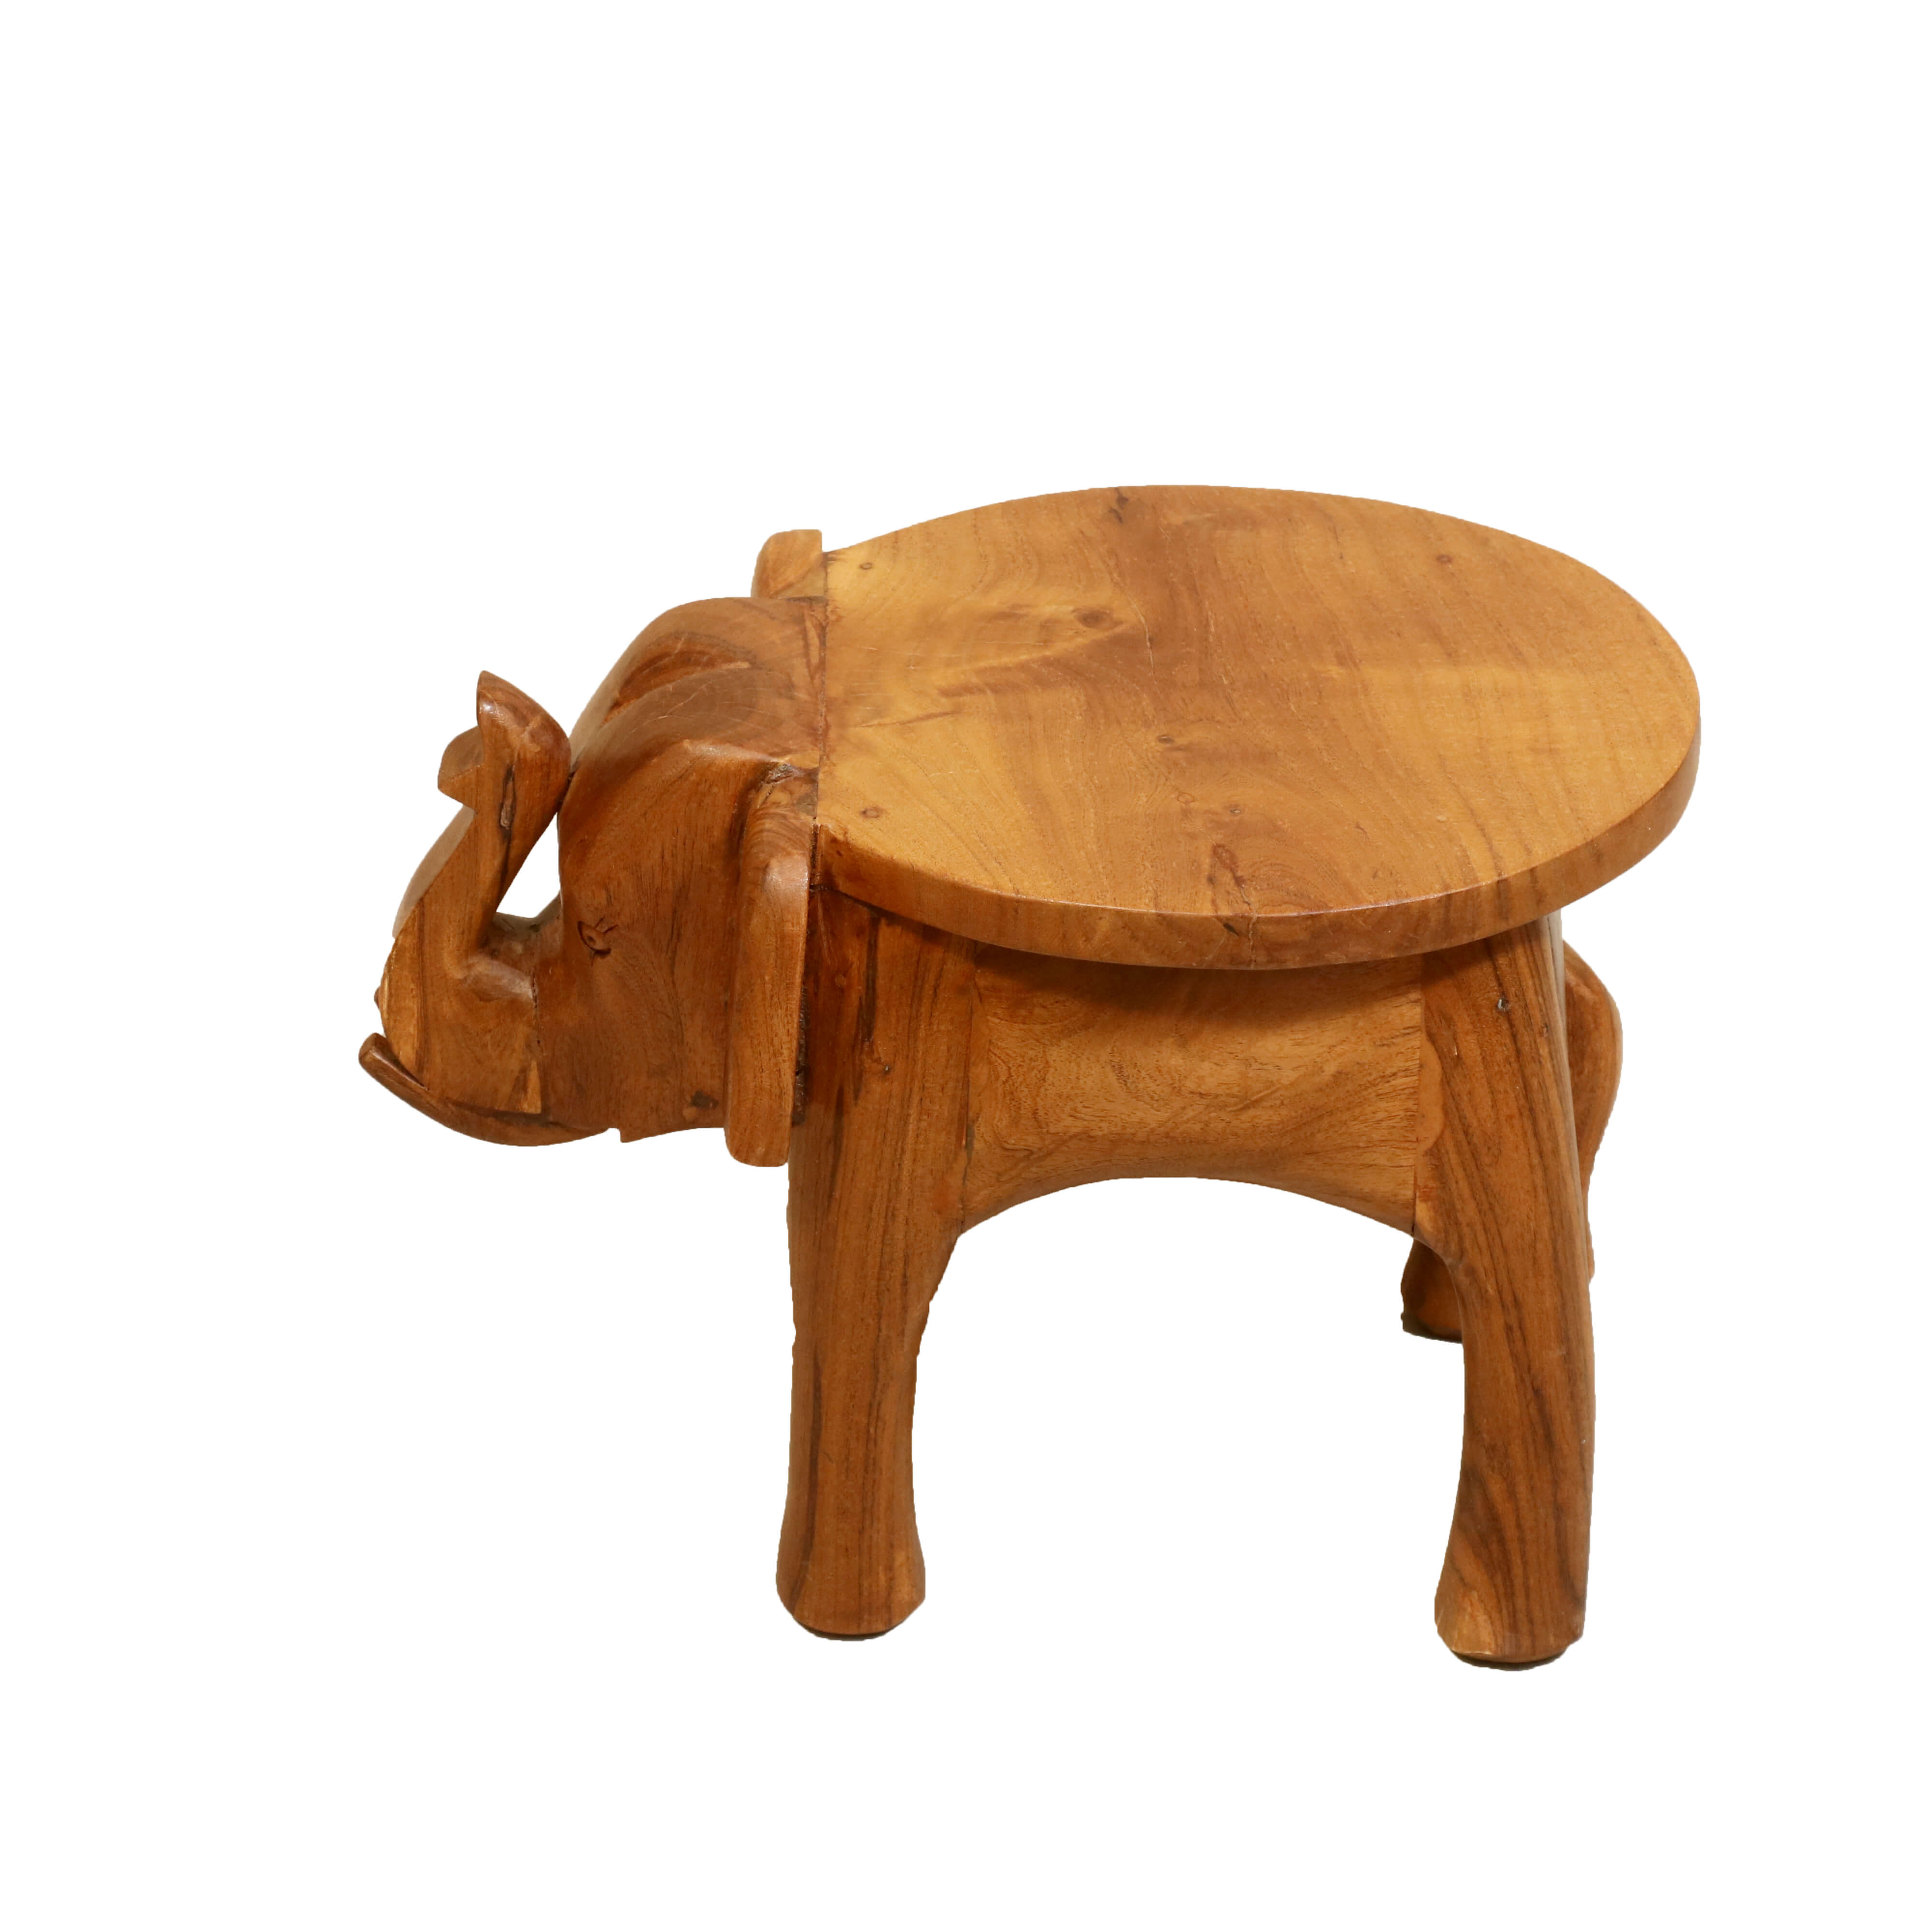 Wooden Tone Elephant Table Stand Extra Large (15 x 20 x 15) Animal Figurine